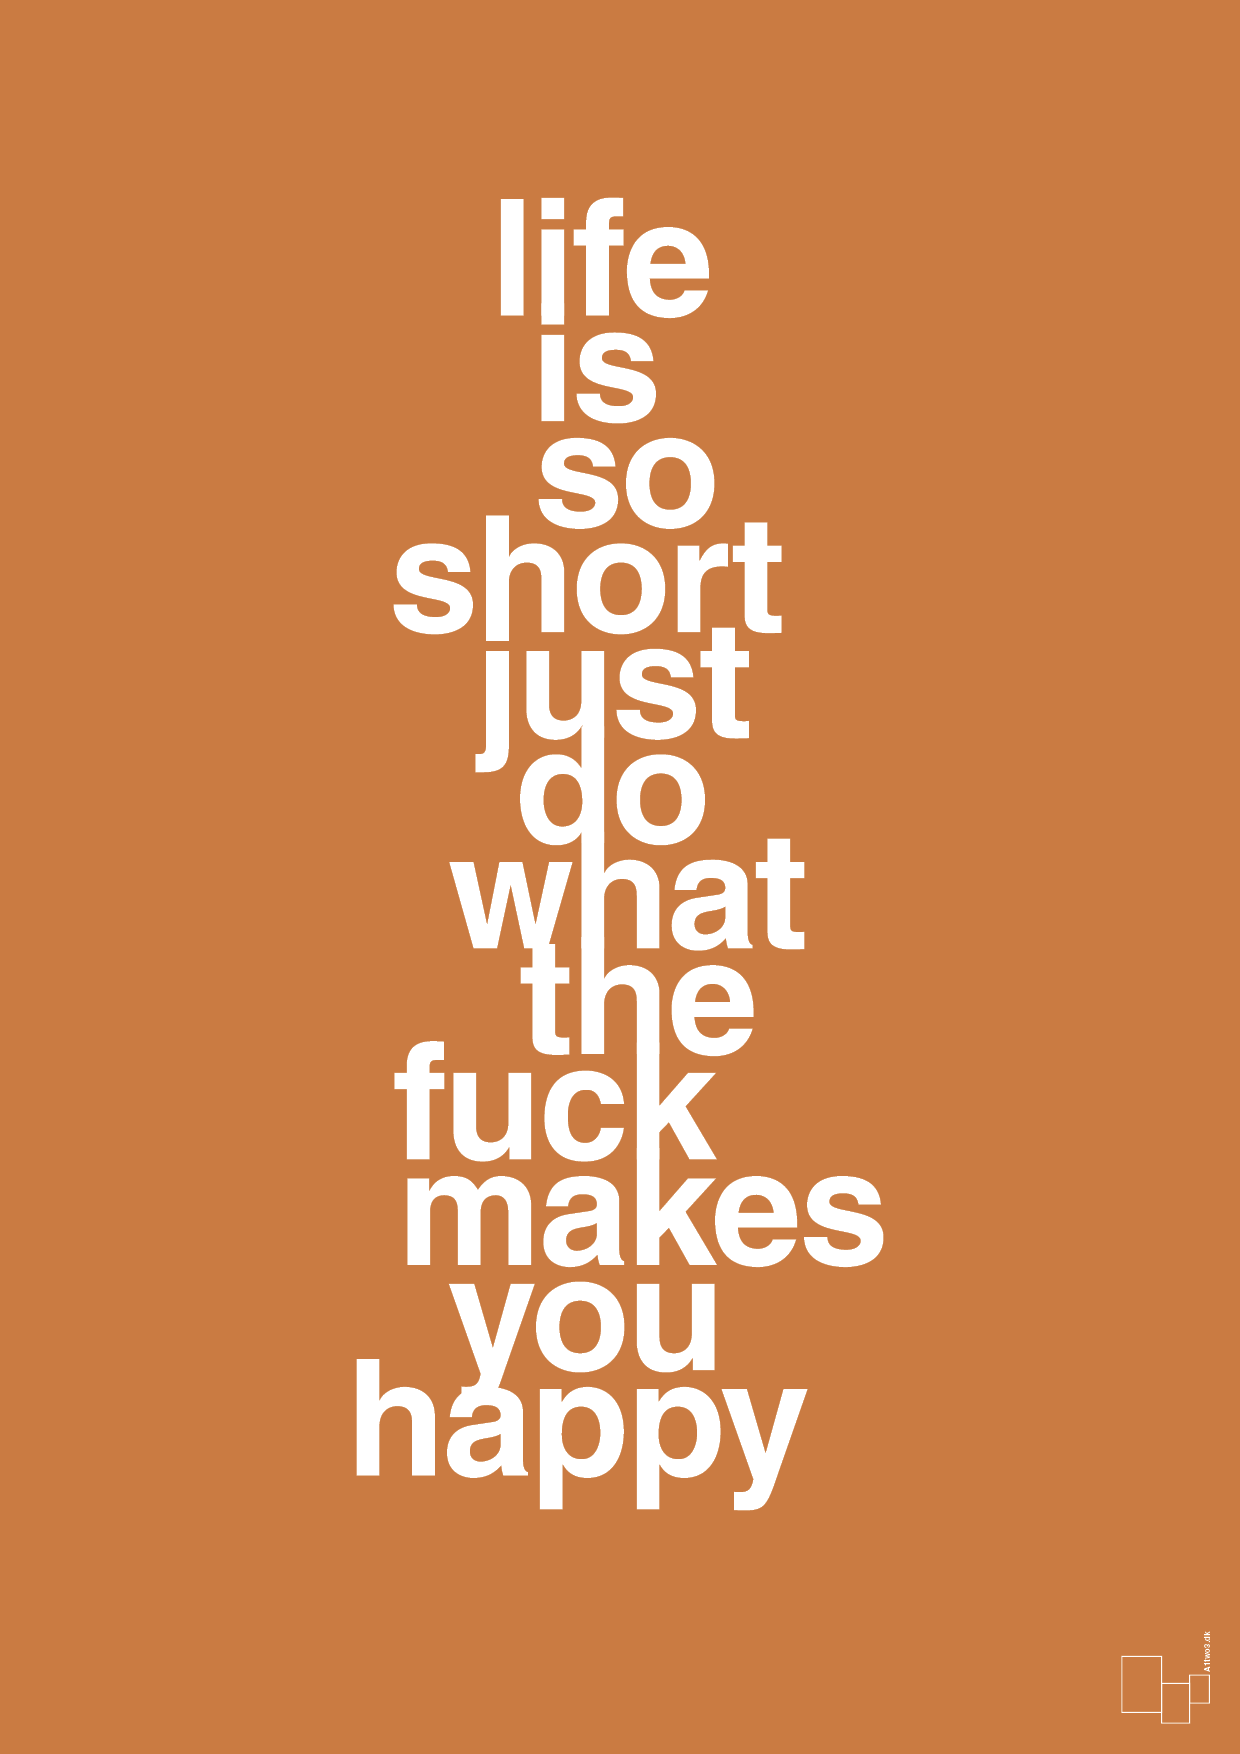 life is so short just do what the fuck makes you happy - Plakat med Ordsprog i Rumba Orange